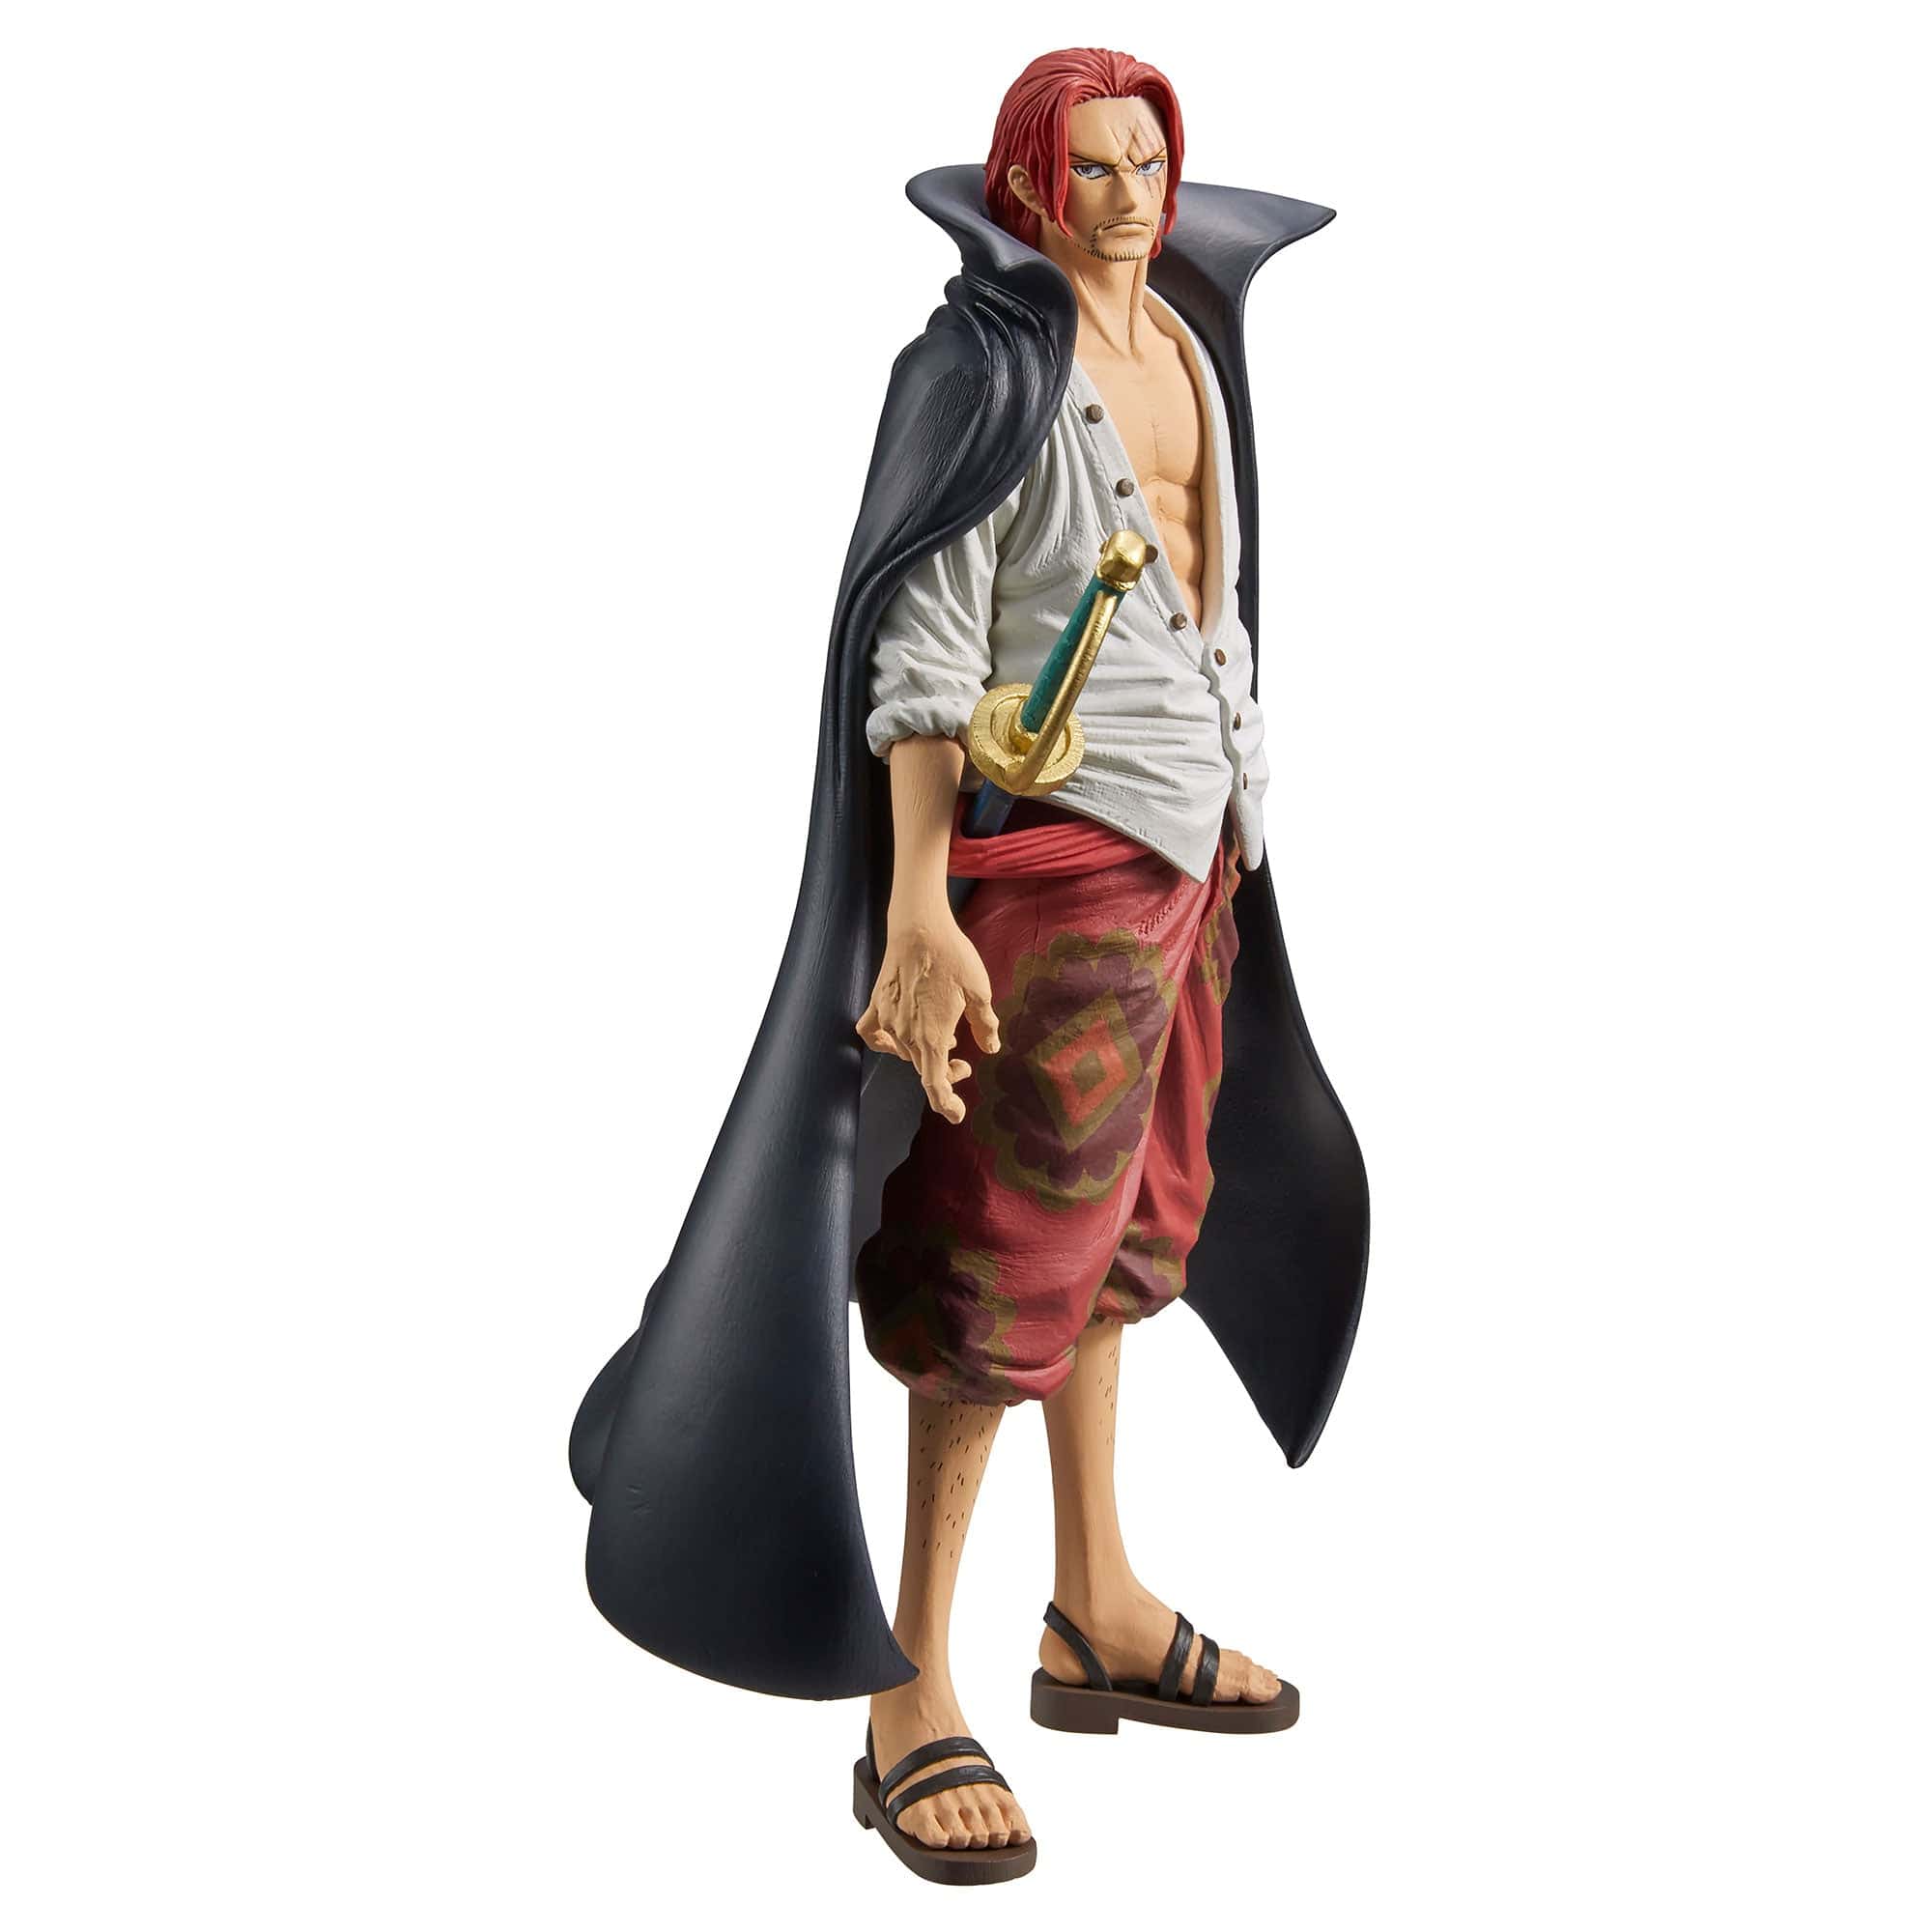 Little Buddy King Of Artist The Shanks [ONE PIECE FILM RED] 9" Figure Kawaii Gifts 4983164191820